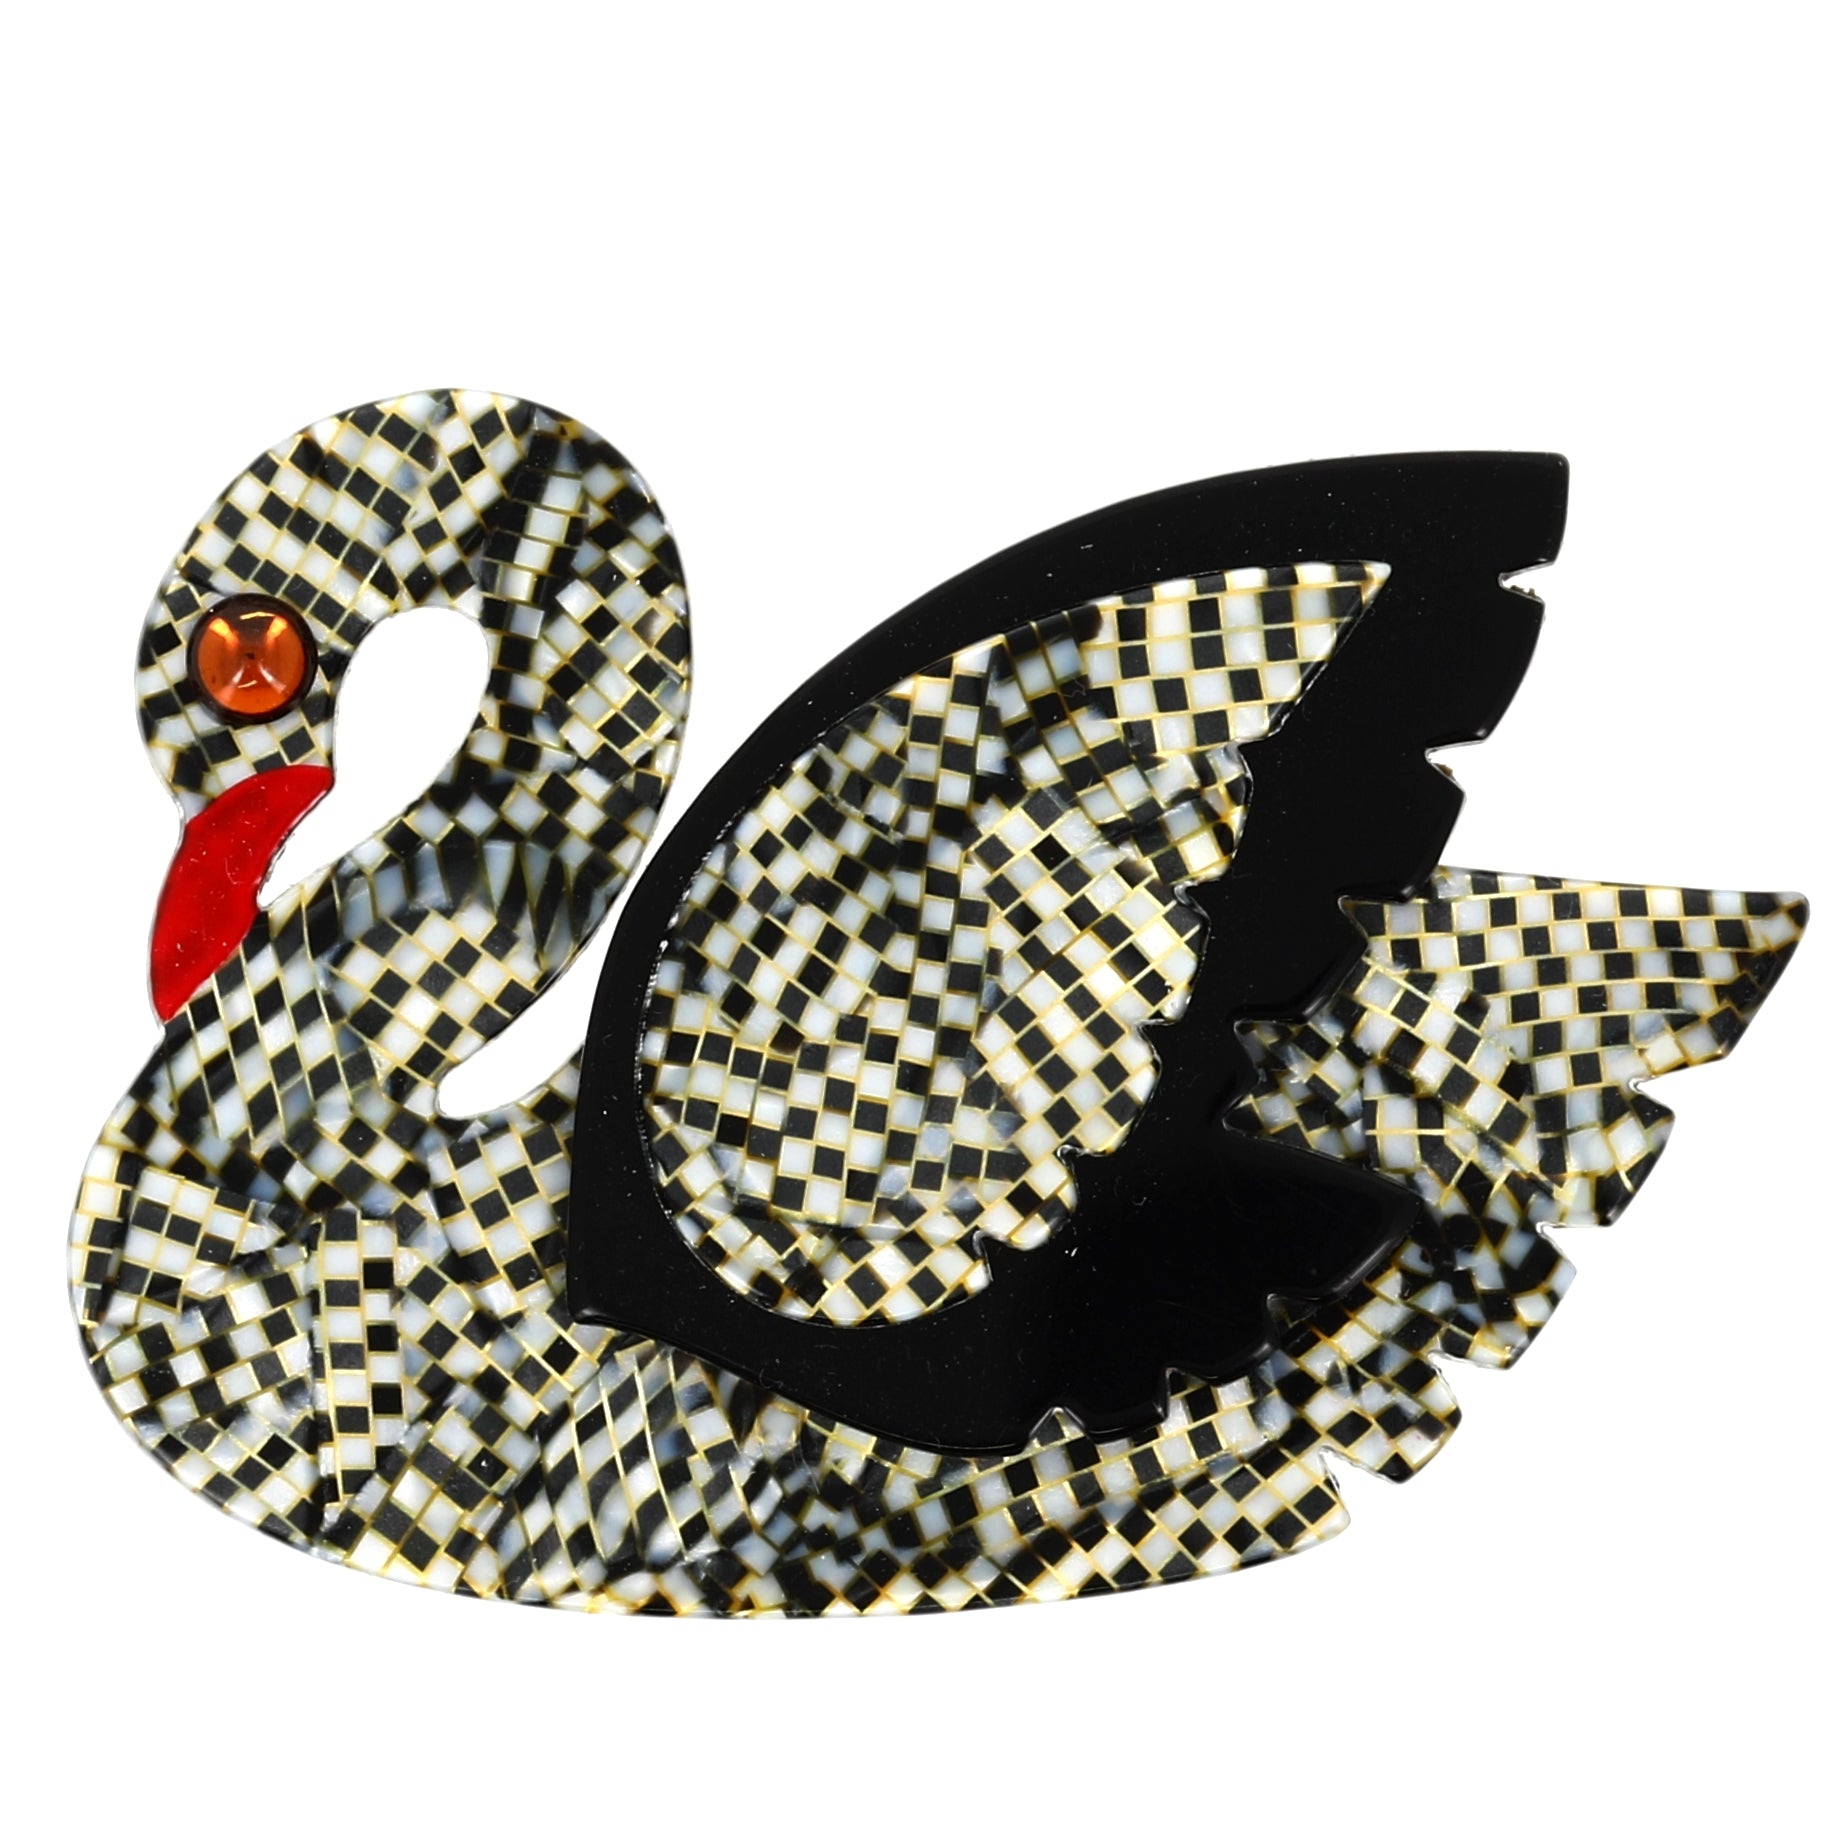 Black and White Checkered with Black Wing Swan Bird Brooch